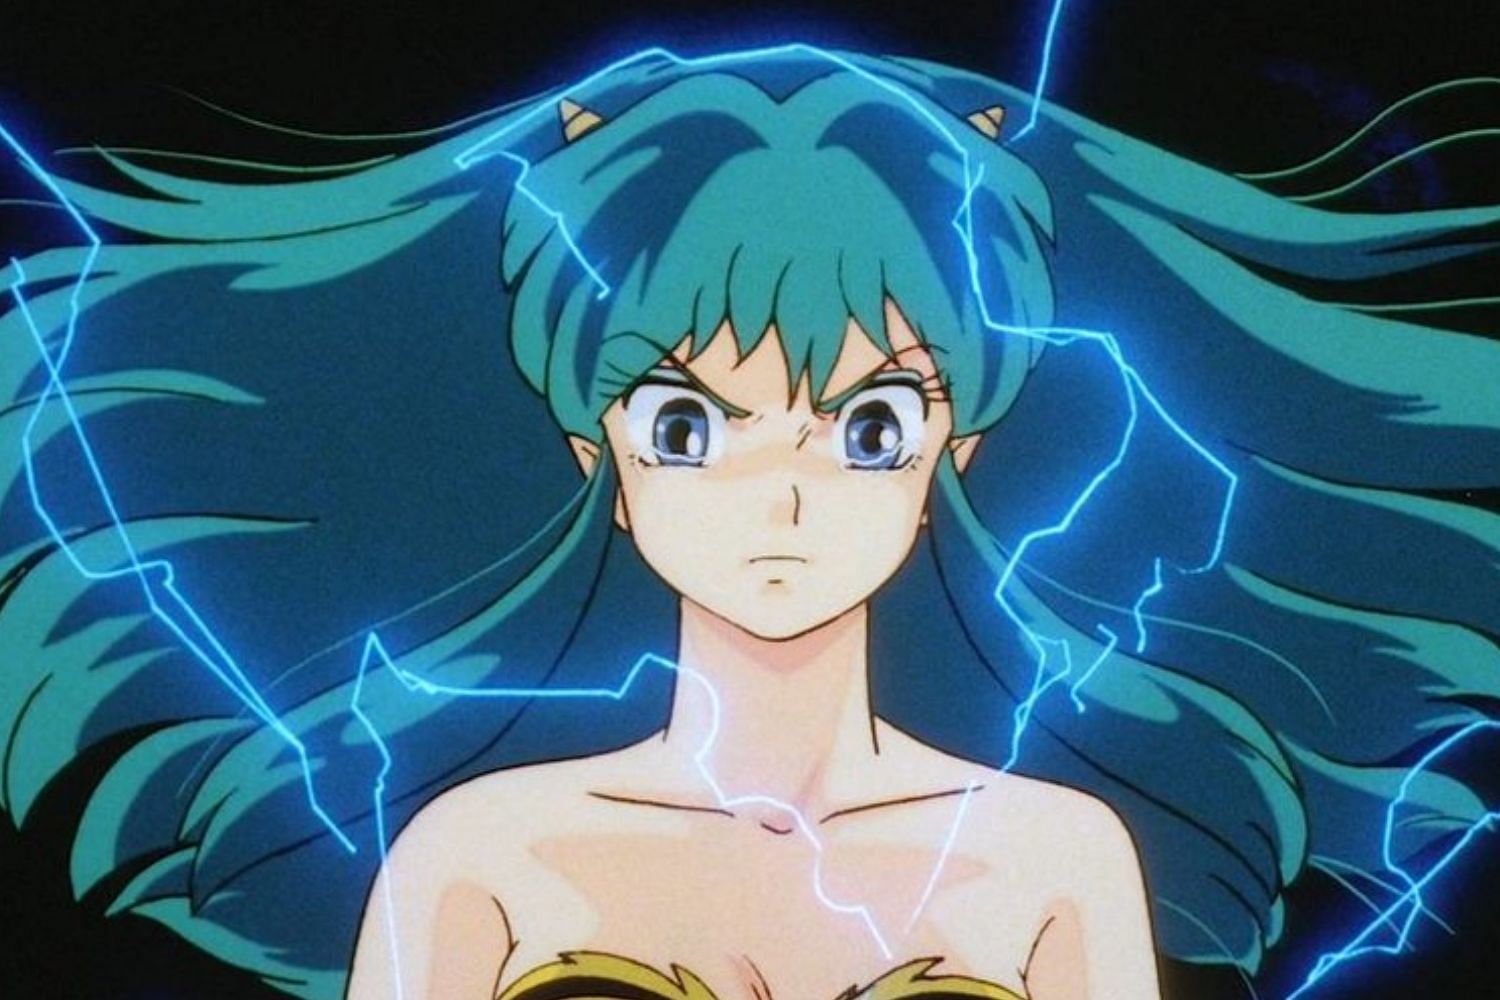 Lum Invader is more iconic than the actual protagonist (Image via Studio Pierrot)